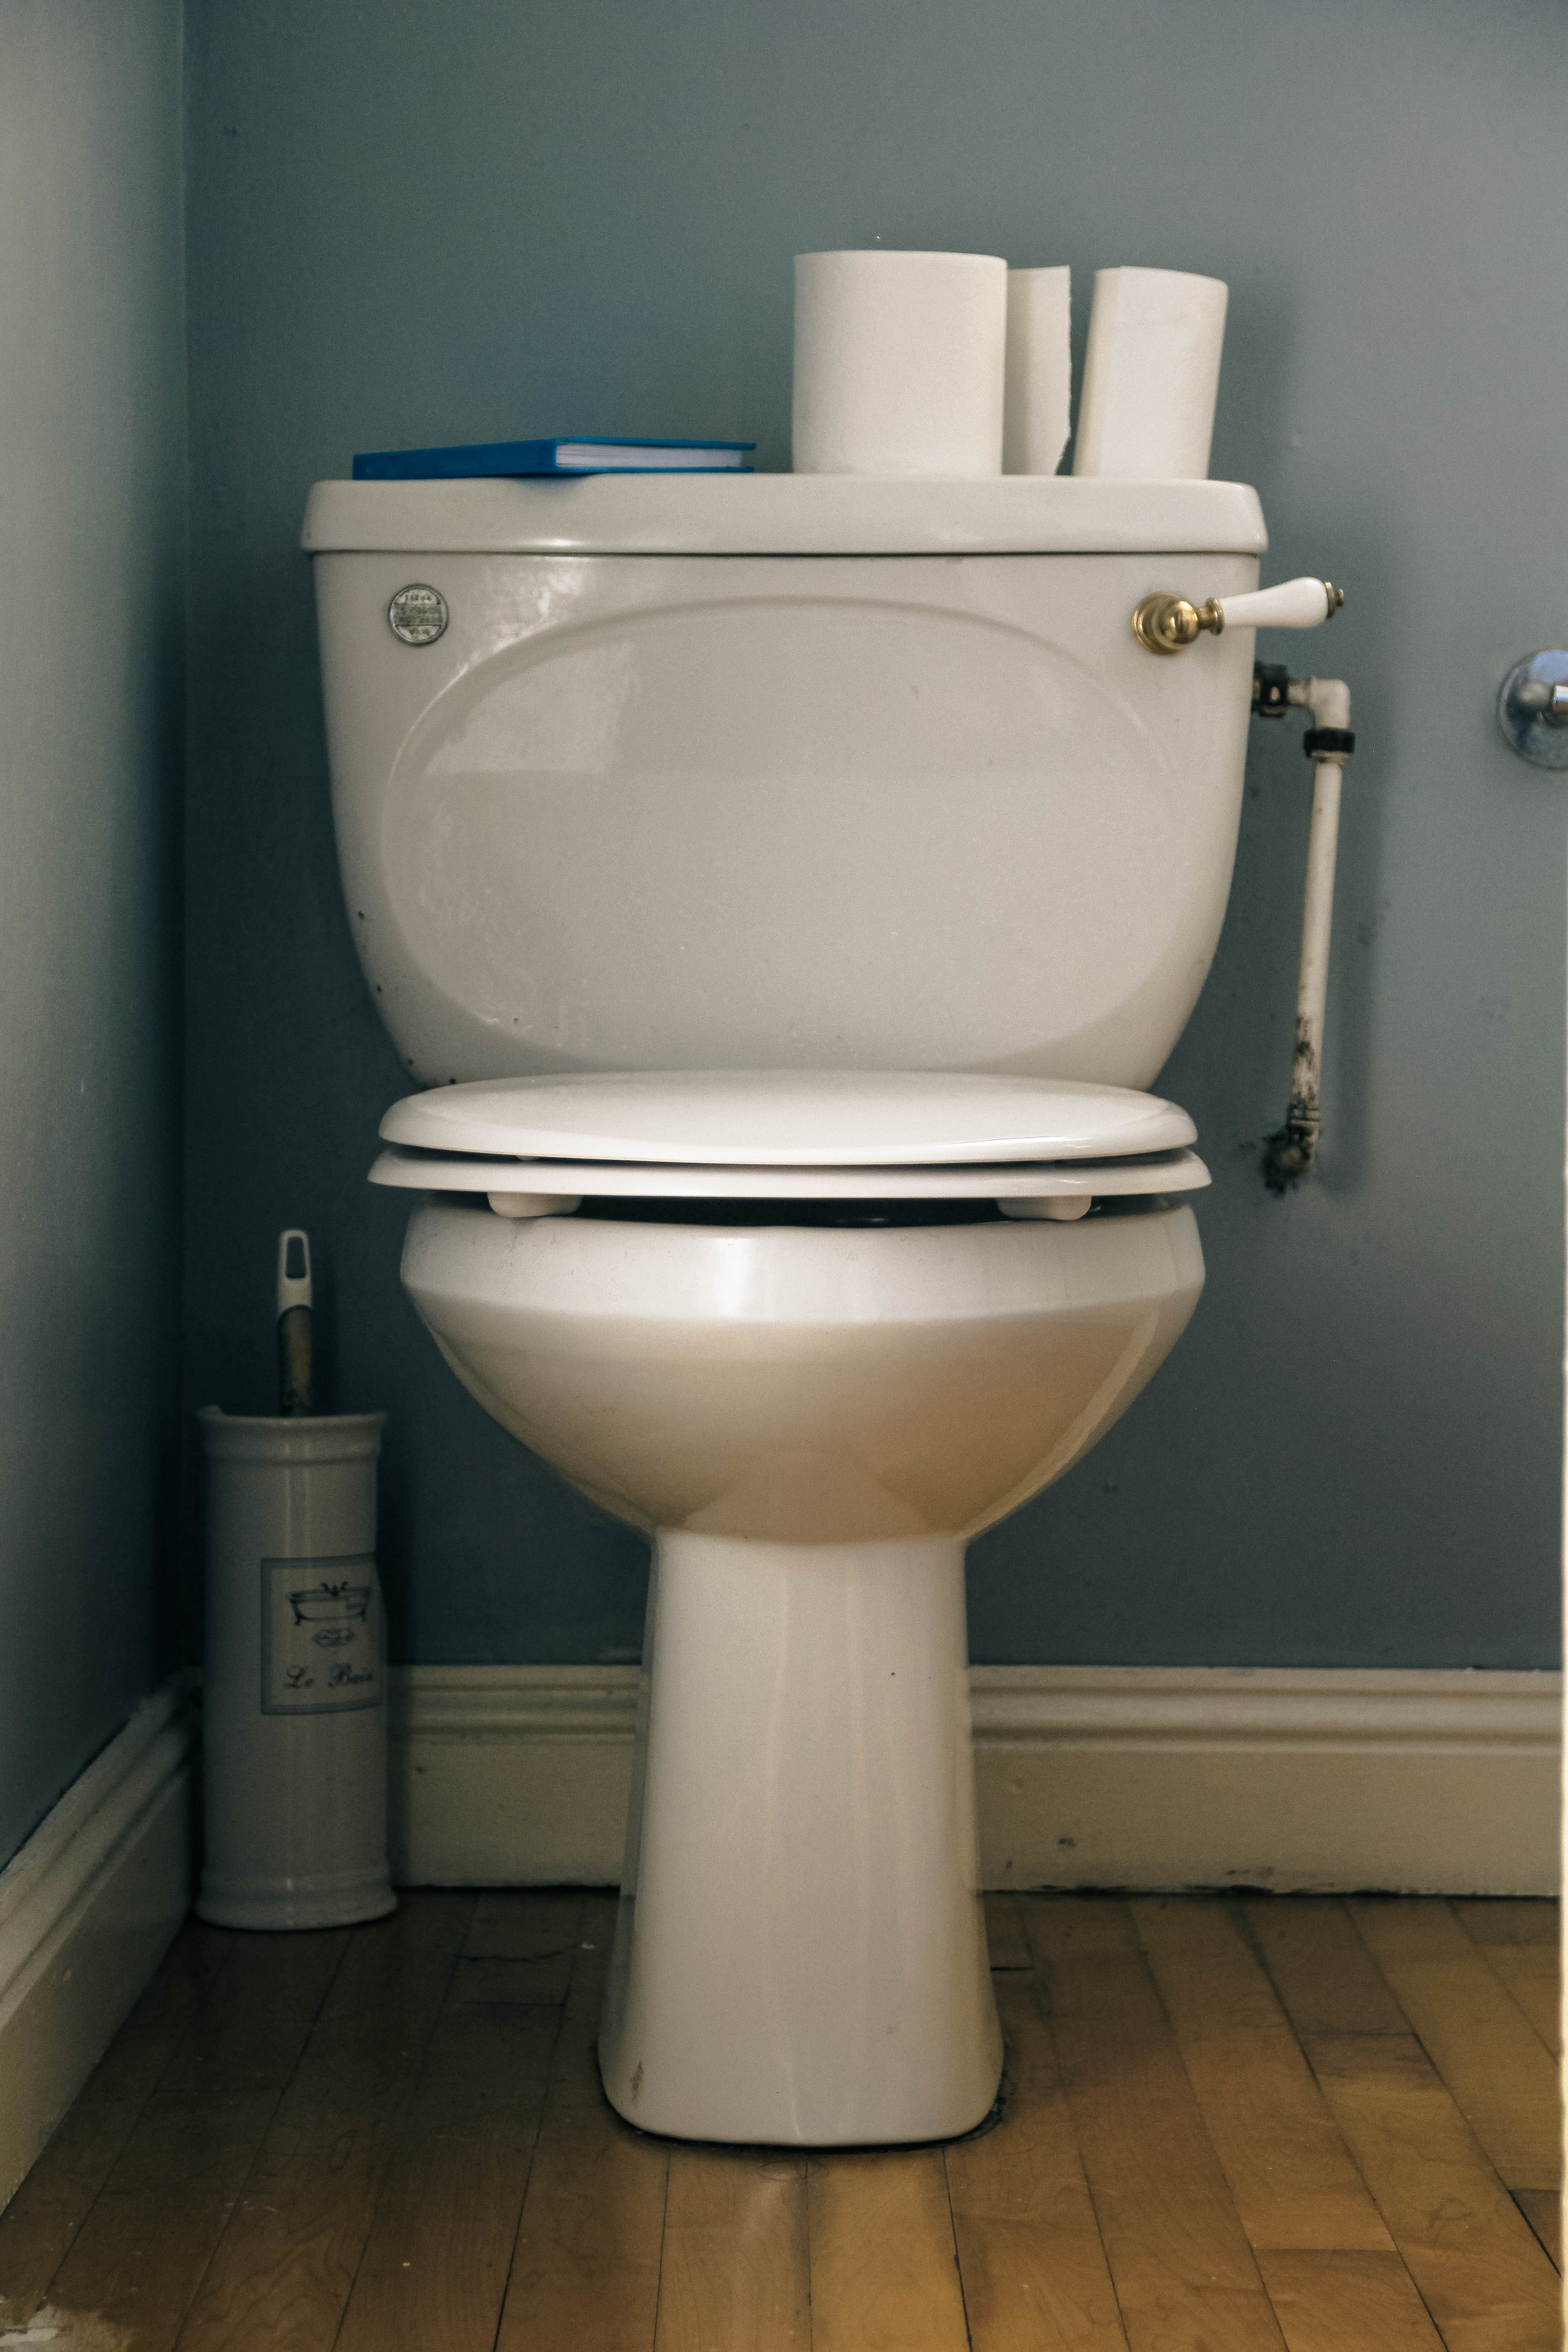 Toilet with extra rolls of toilet paper on the tank, set against a blue wall